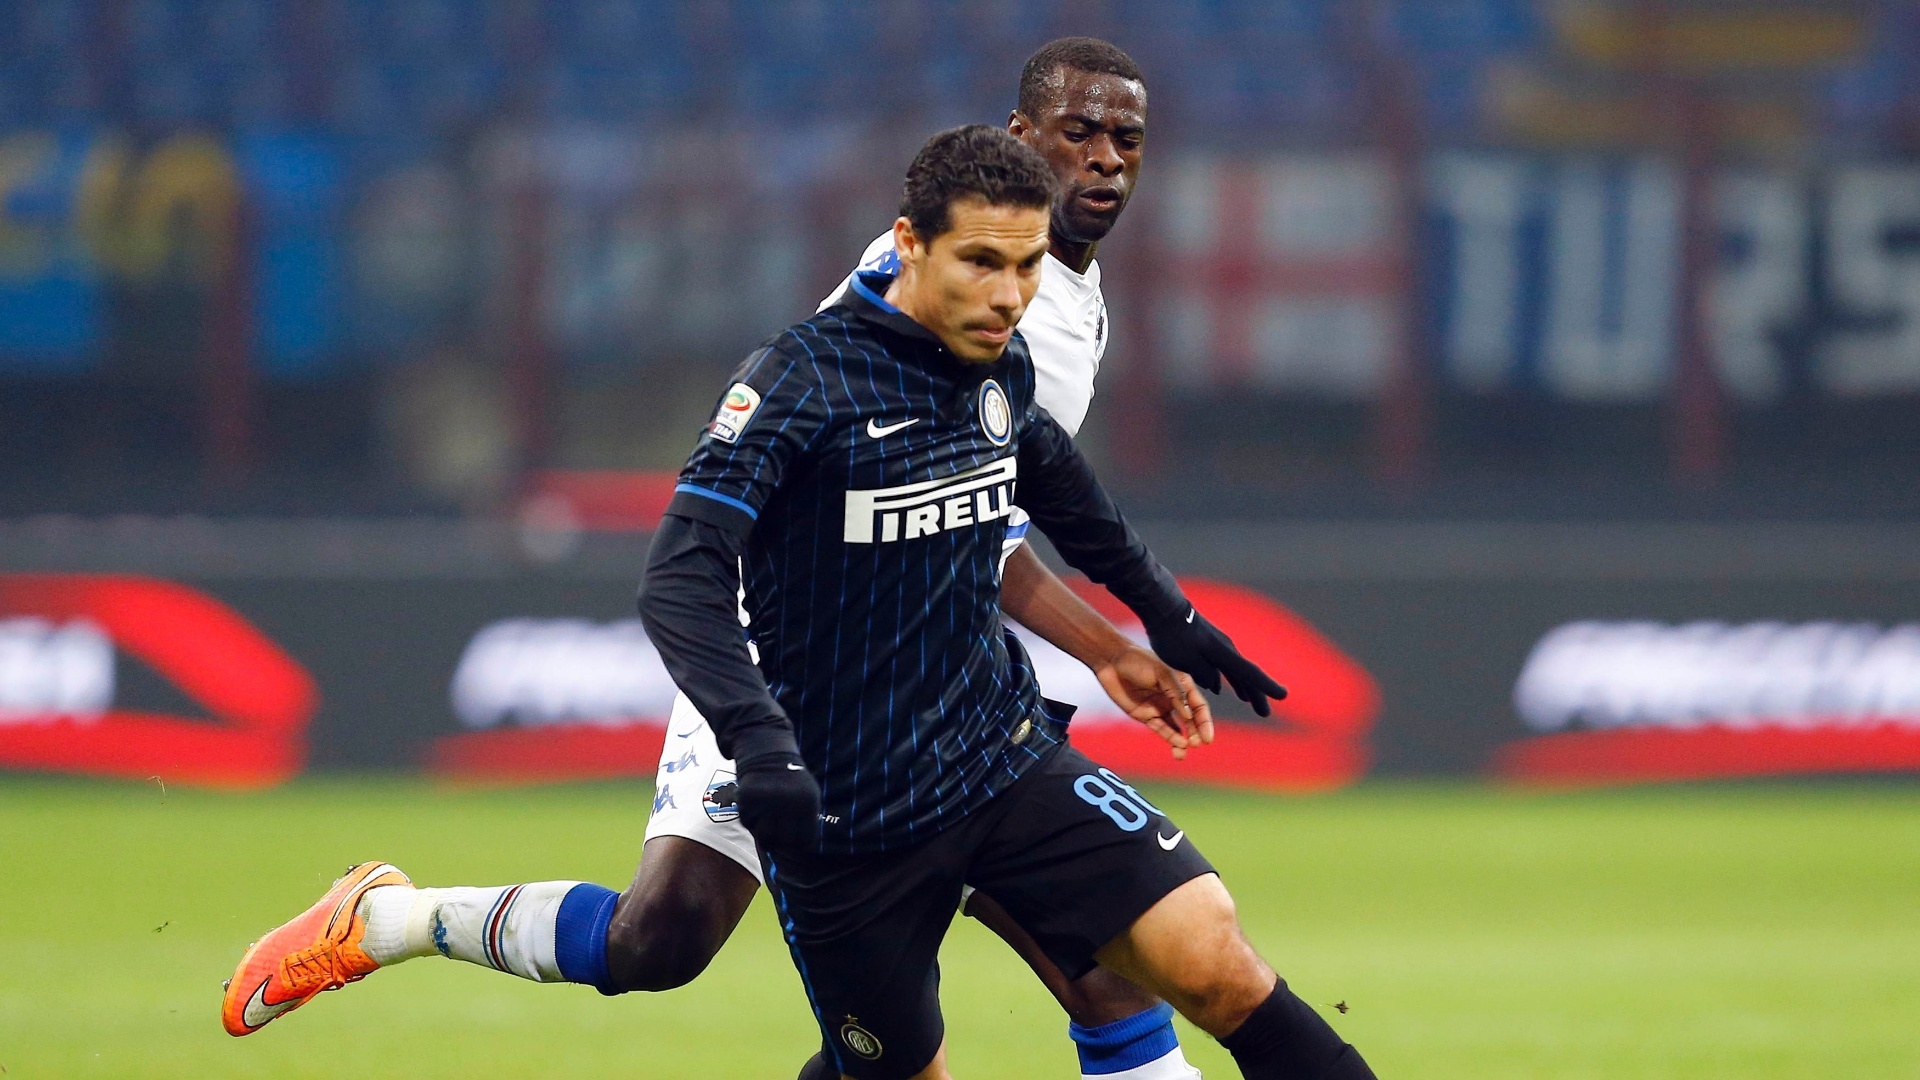 Hernanes to MP: “Now for Continuity. Next year…”